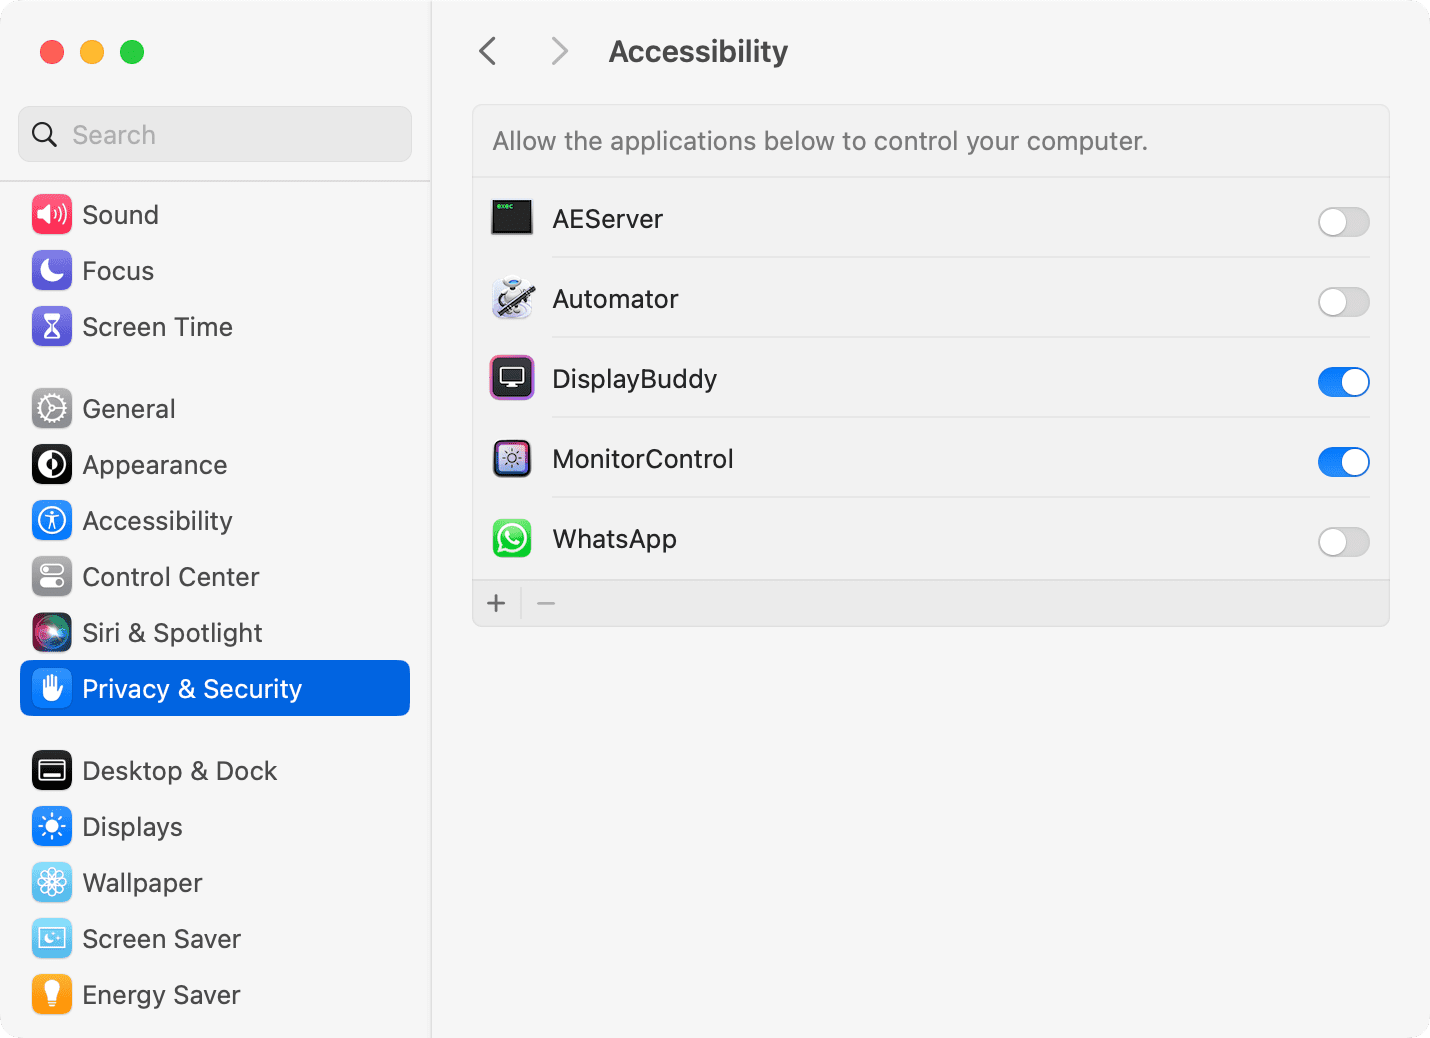 Allow Accessibility settings for DisplayBuddy and MonitorControl apps on Mac